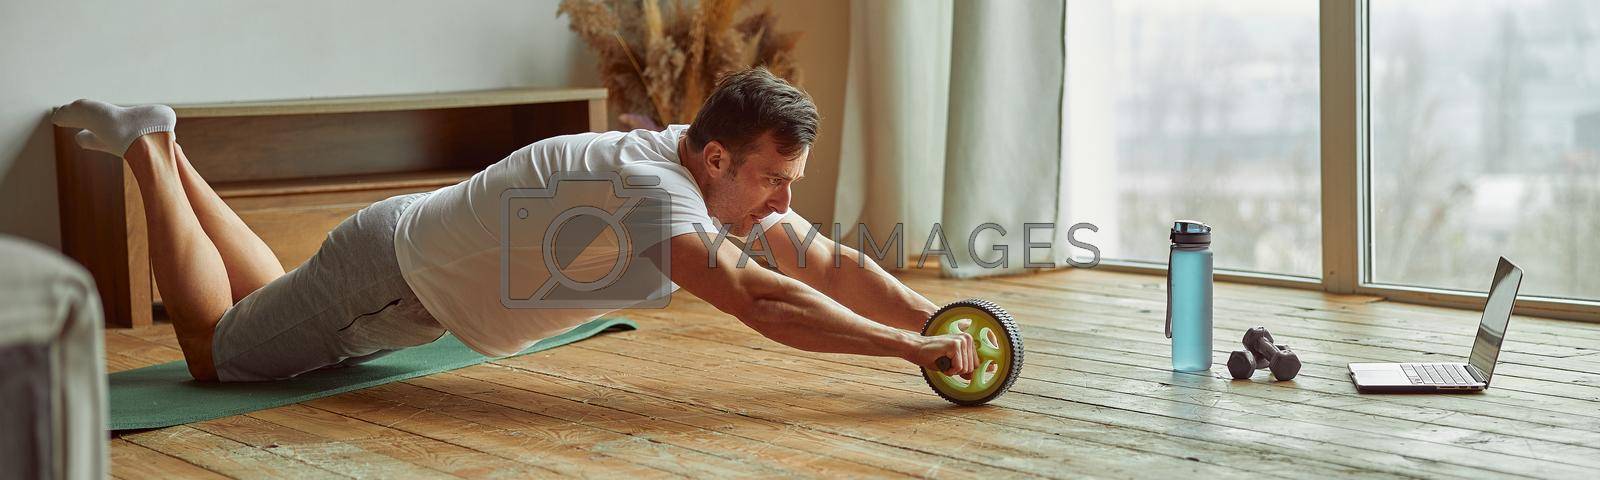 Royalty free image of Man doing training with equipment and laptop indoors by Yaroslav_astakhov